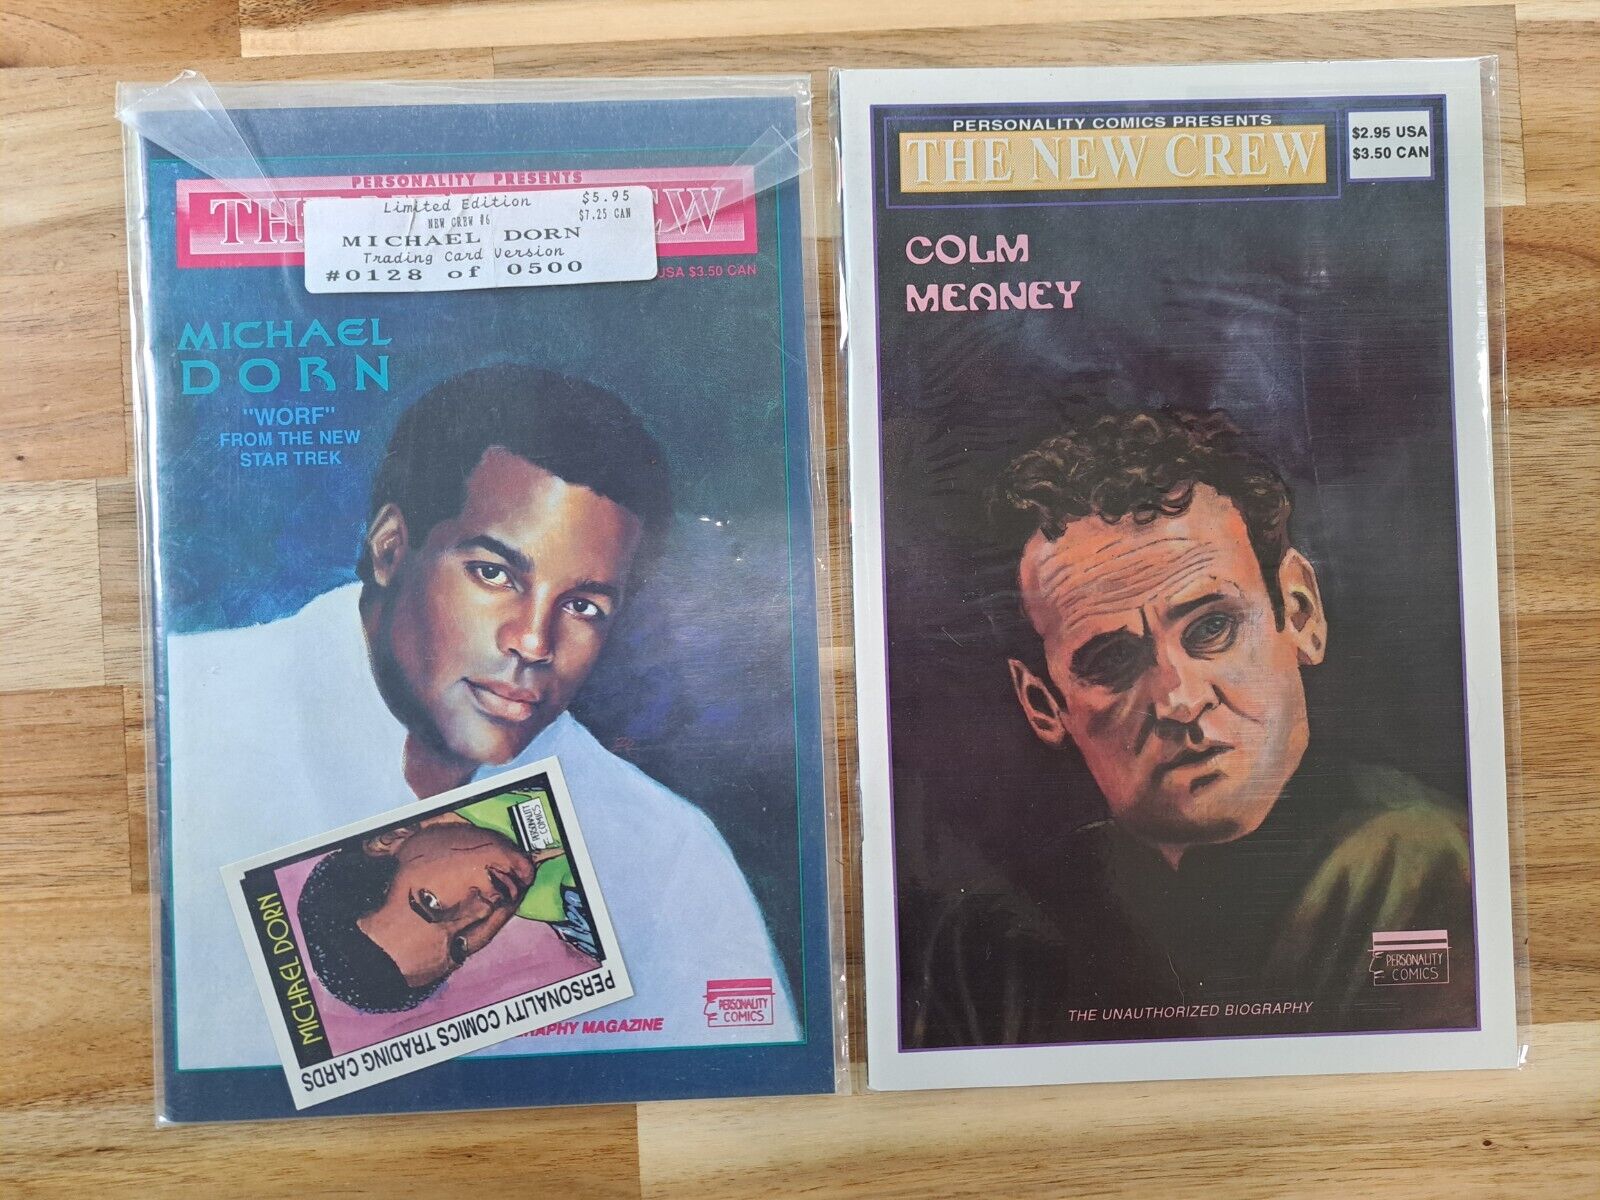 2 Comics: The New Crew - Colm Meaney, Michael Dorn, Comic Book Personality 1992 